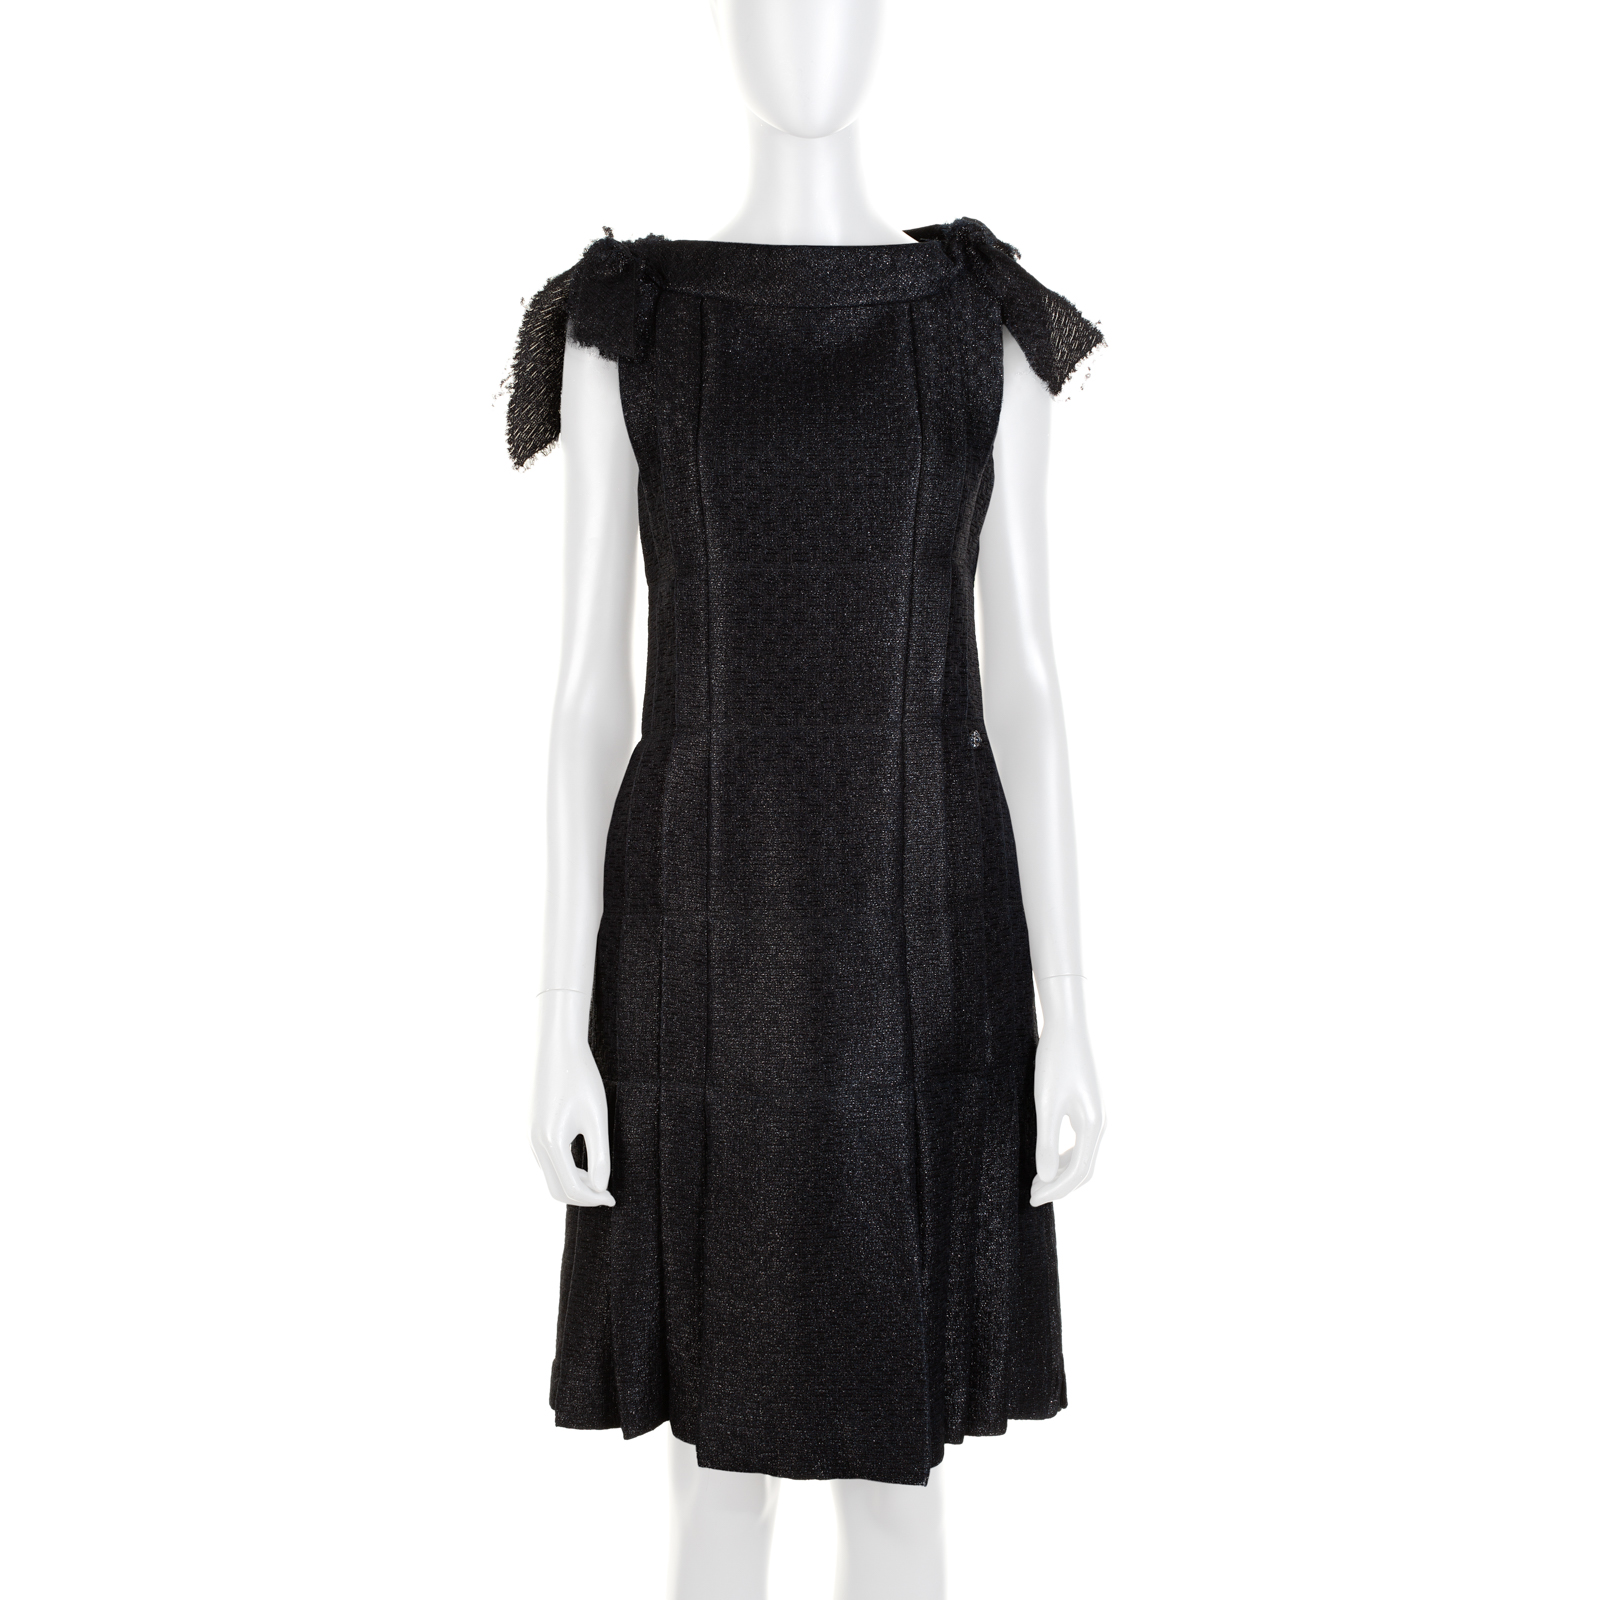 Black Lurex Bow Embellished Cocktail Dress by Chanel - Le Dressing Monaco